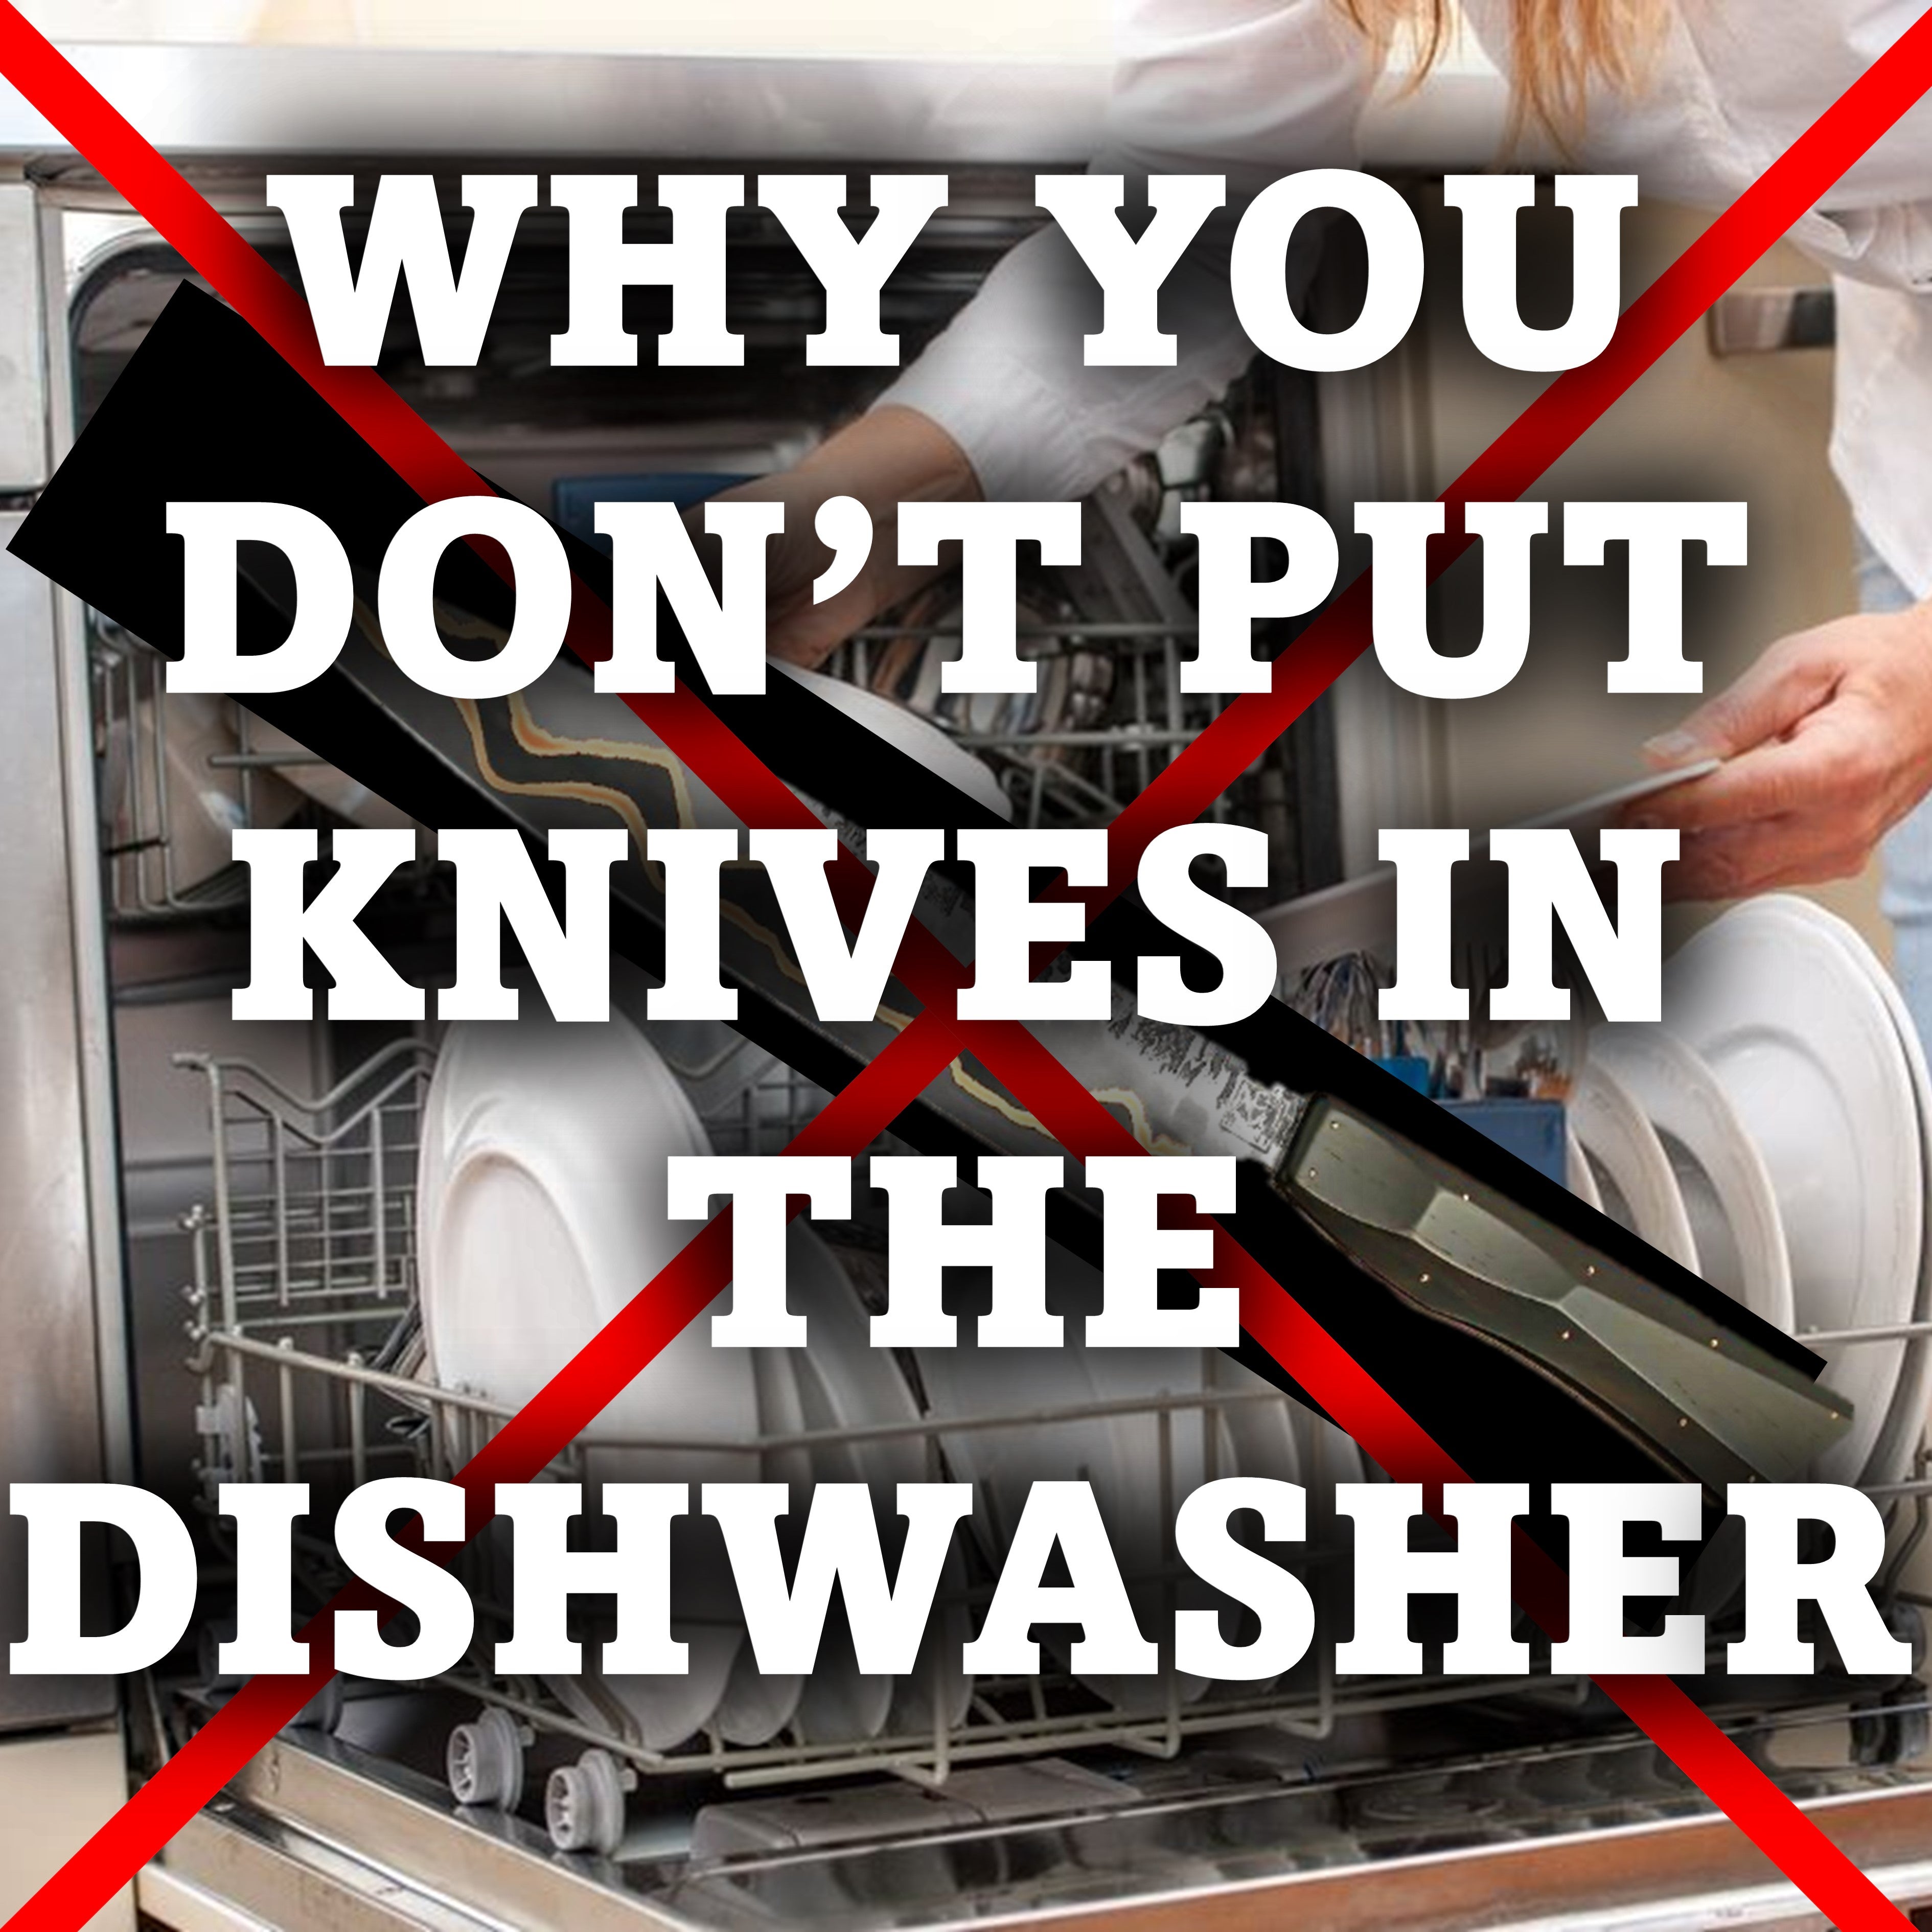 A short guide about why your knives can’t go in the dishwasher.